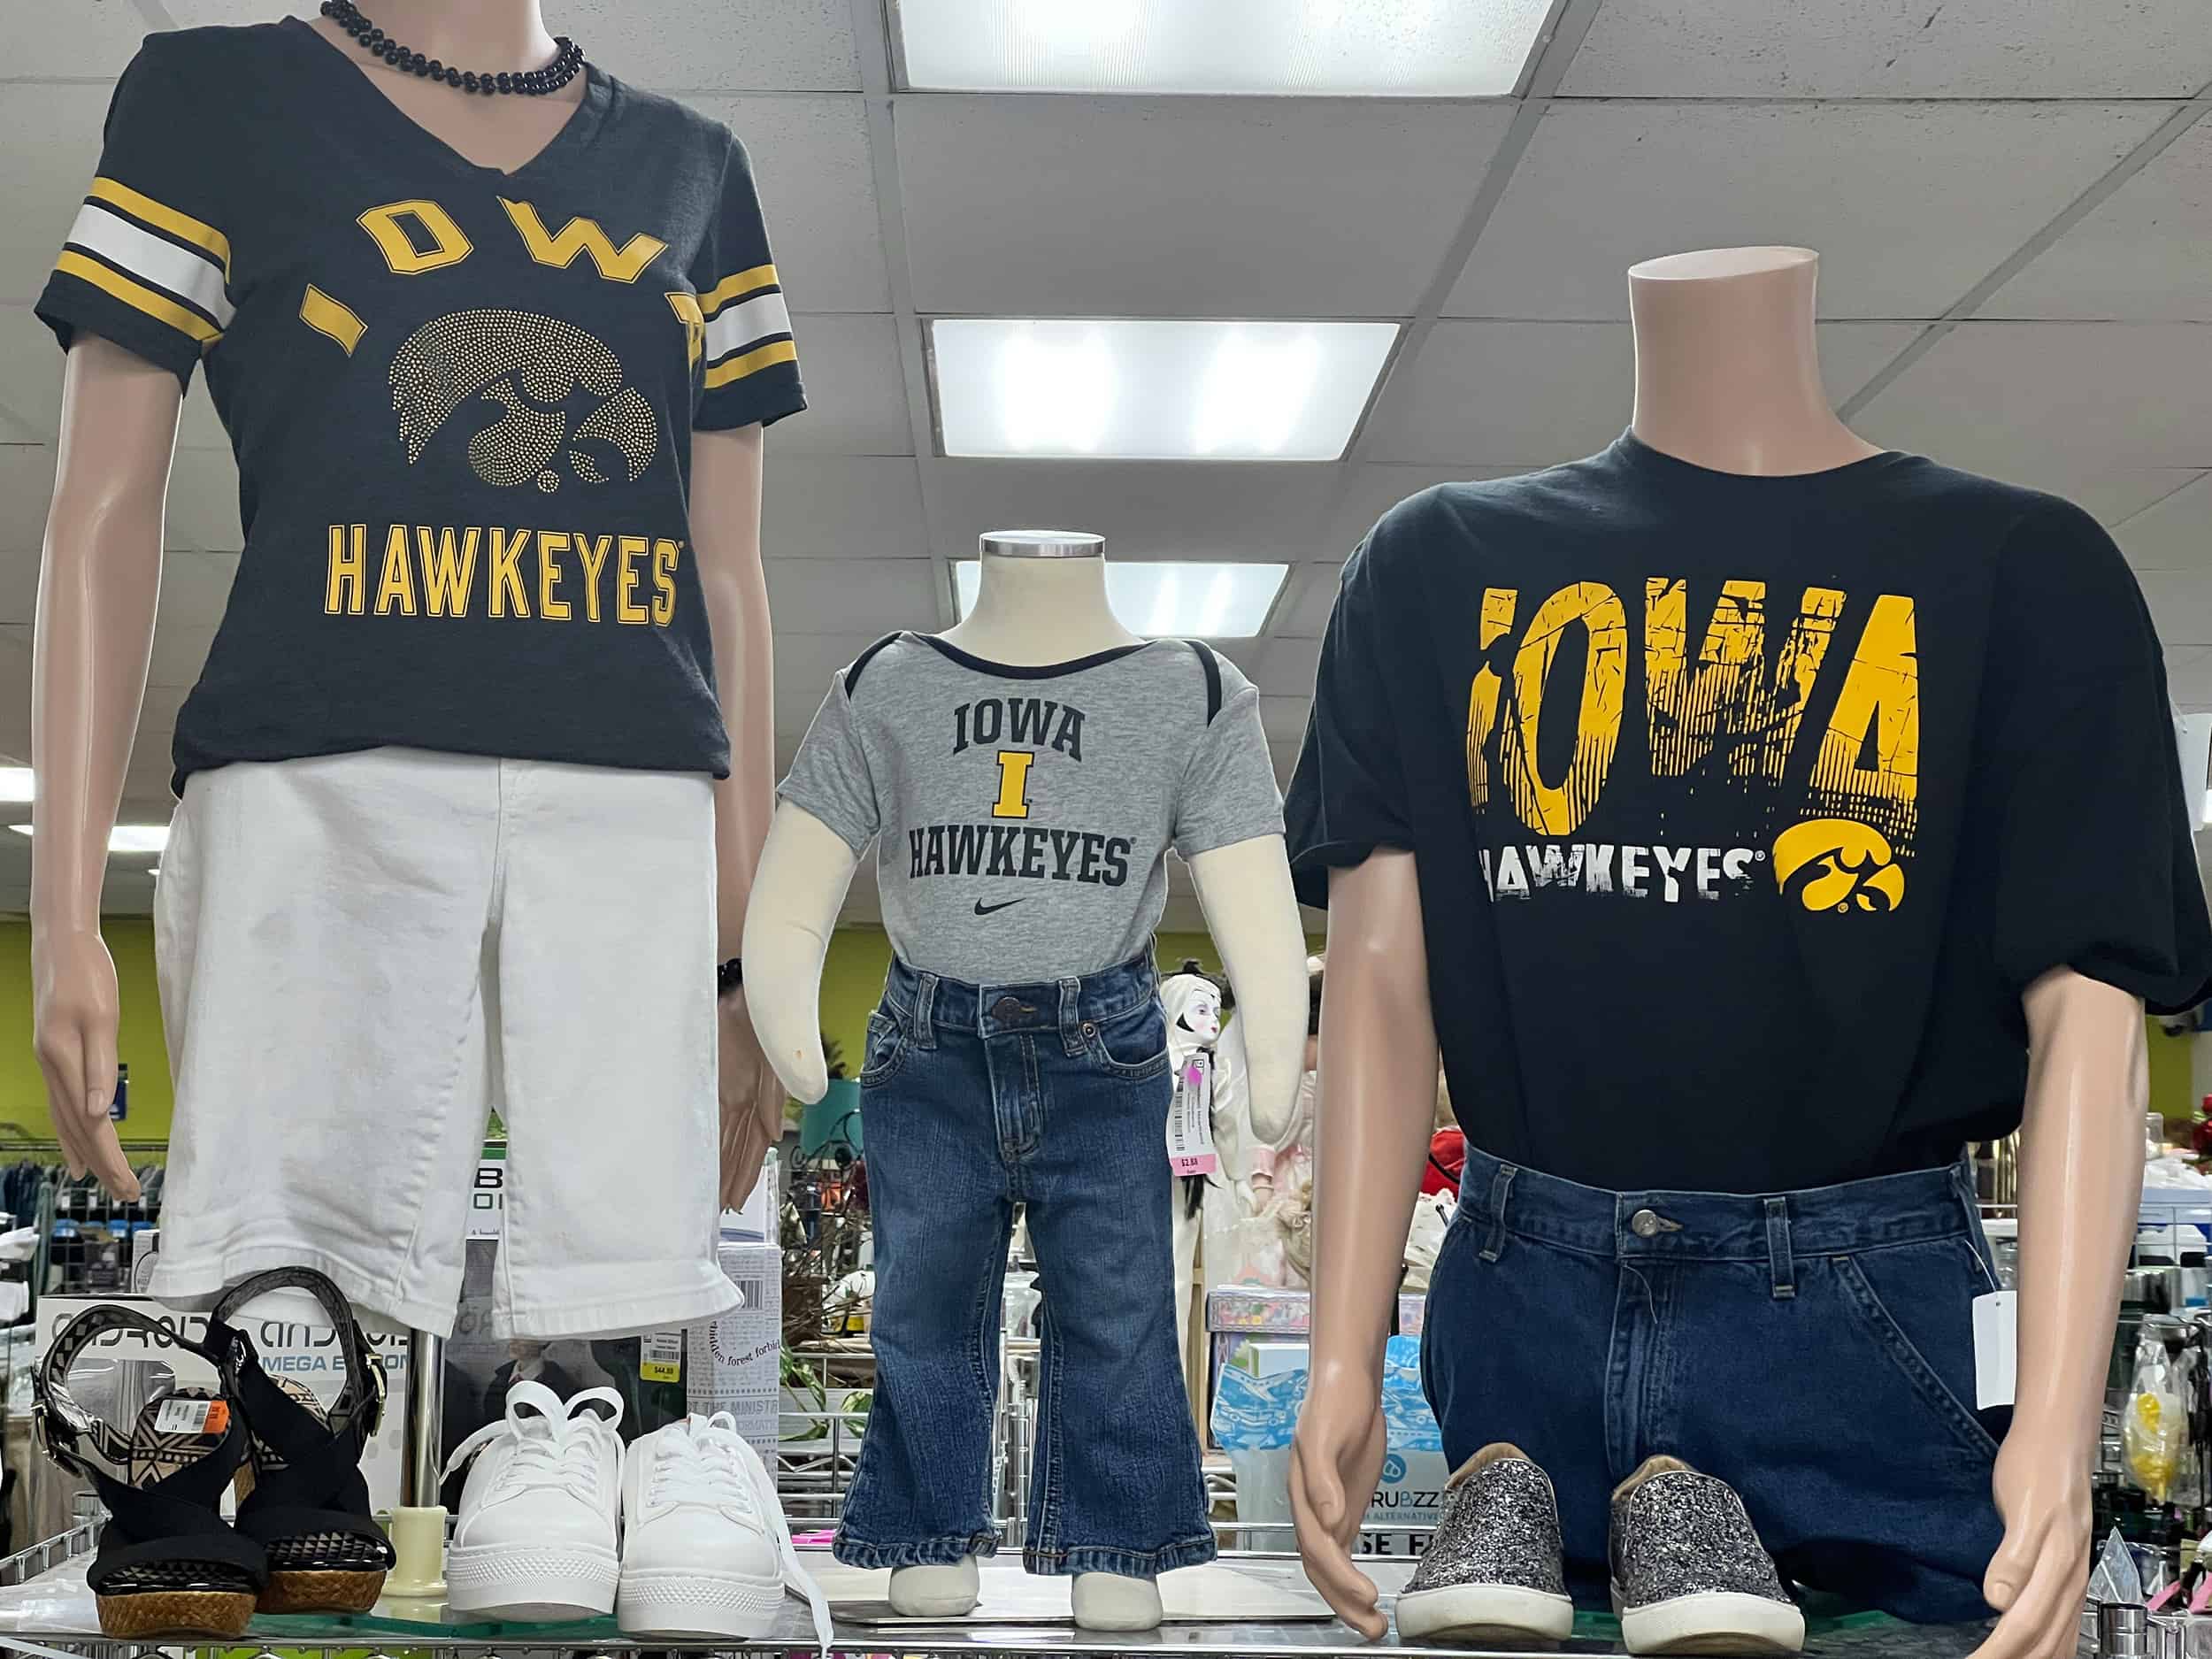 Get your game day gear at a Goodwill Spirit Shop